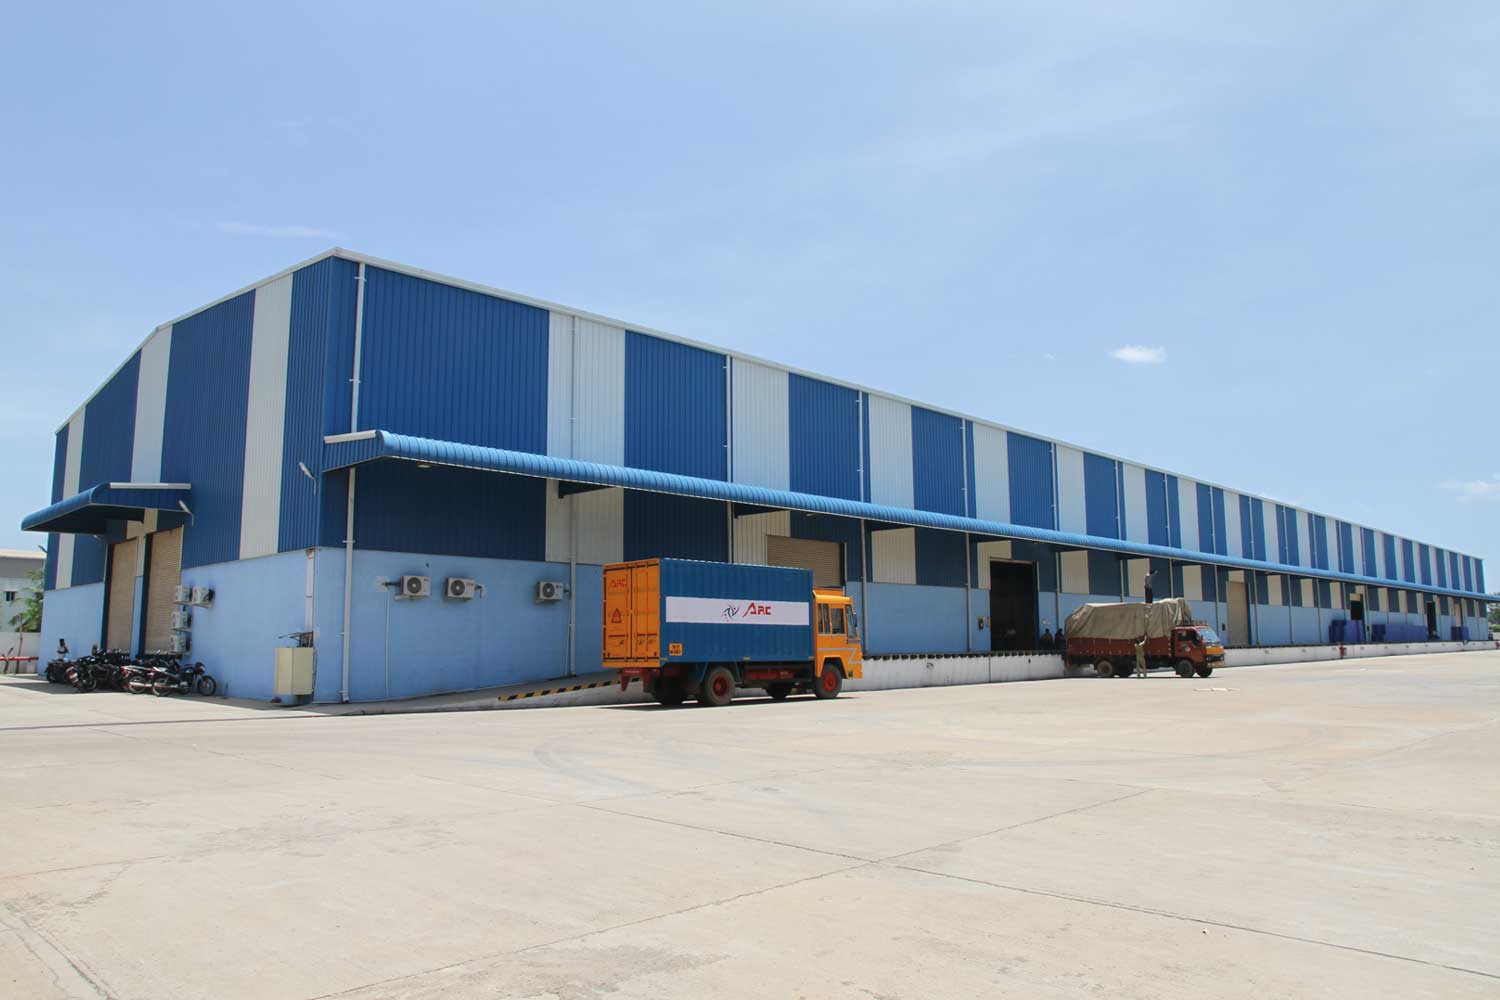 Location: Belize Usage: Warehouse building Size: Span 21 meters, length 120 meters